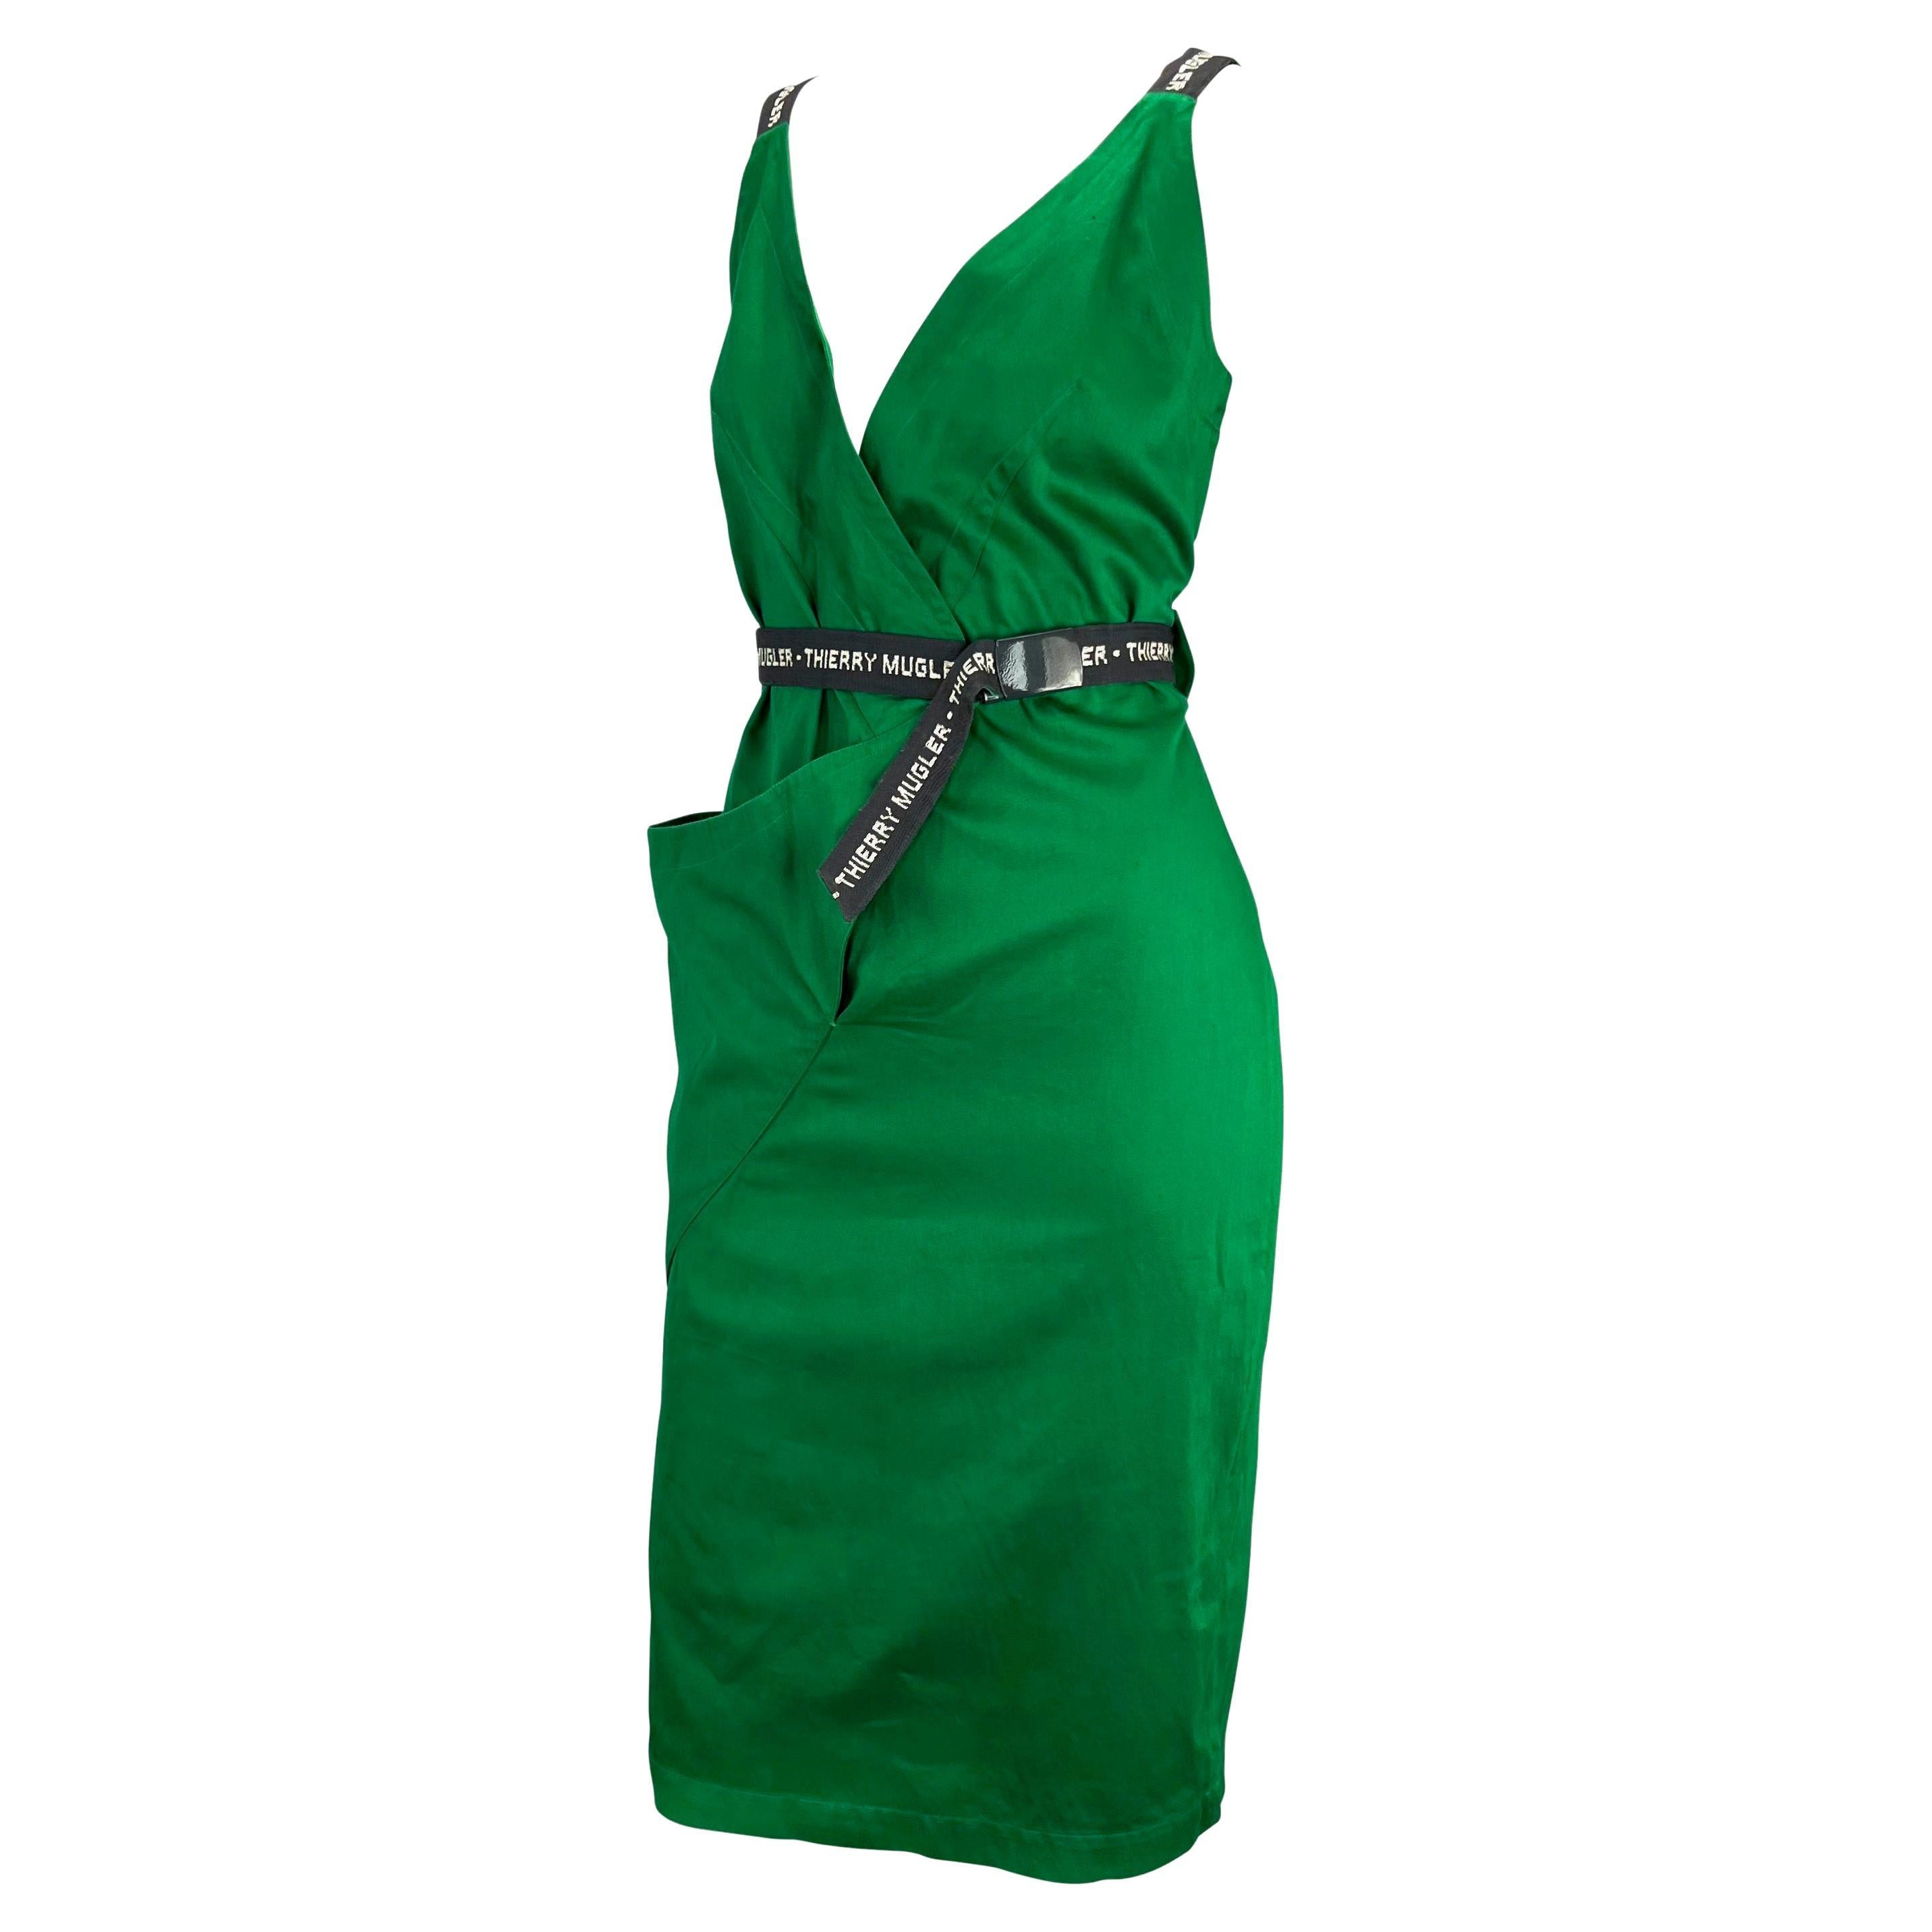 Presenting a vibrant green Thierry Mugler wrap dress, designed by Manfred Mugler. From the early 1980s, this cotton wrap dress features a v-neckline, one asymmetric pocket, and a grey built in belt. For the Mugler lover, this dress proudly boasts